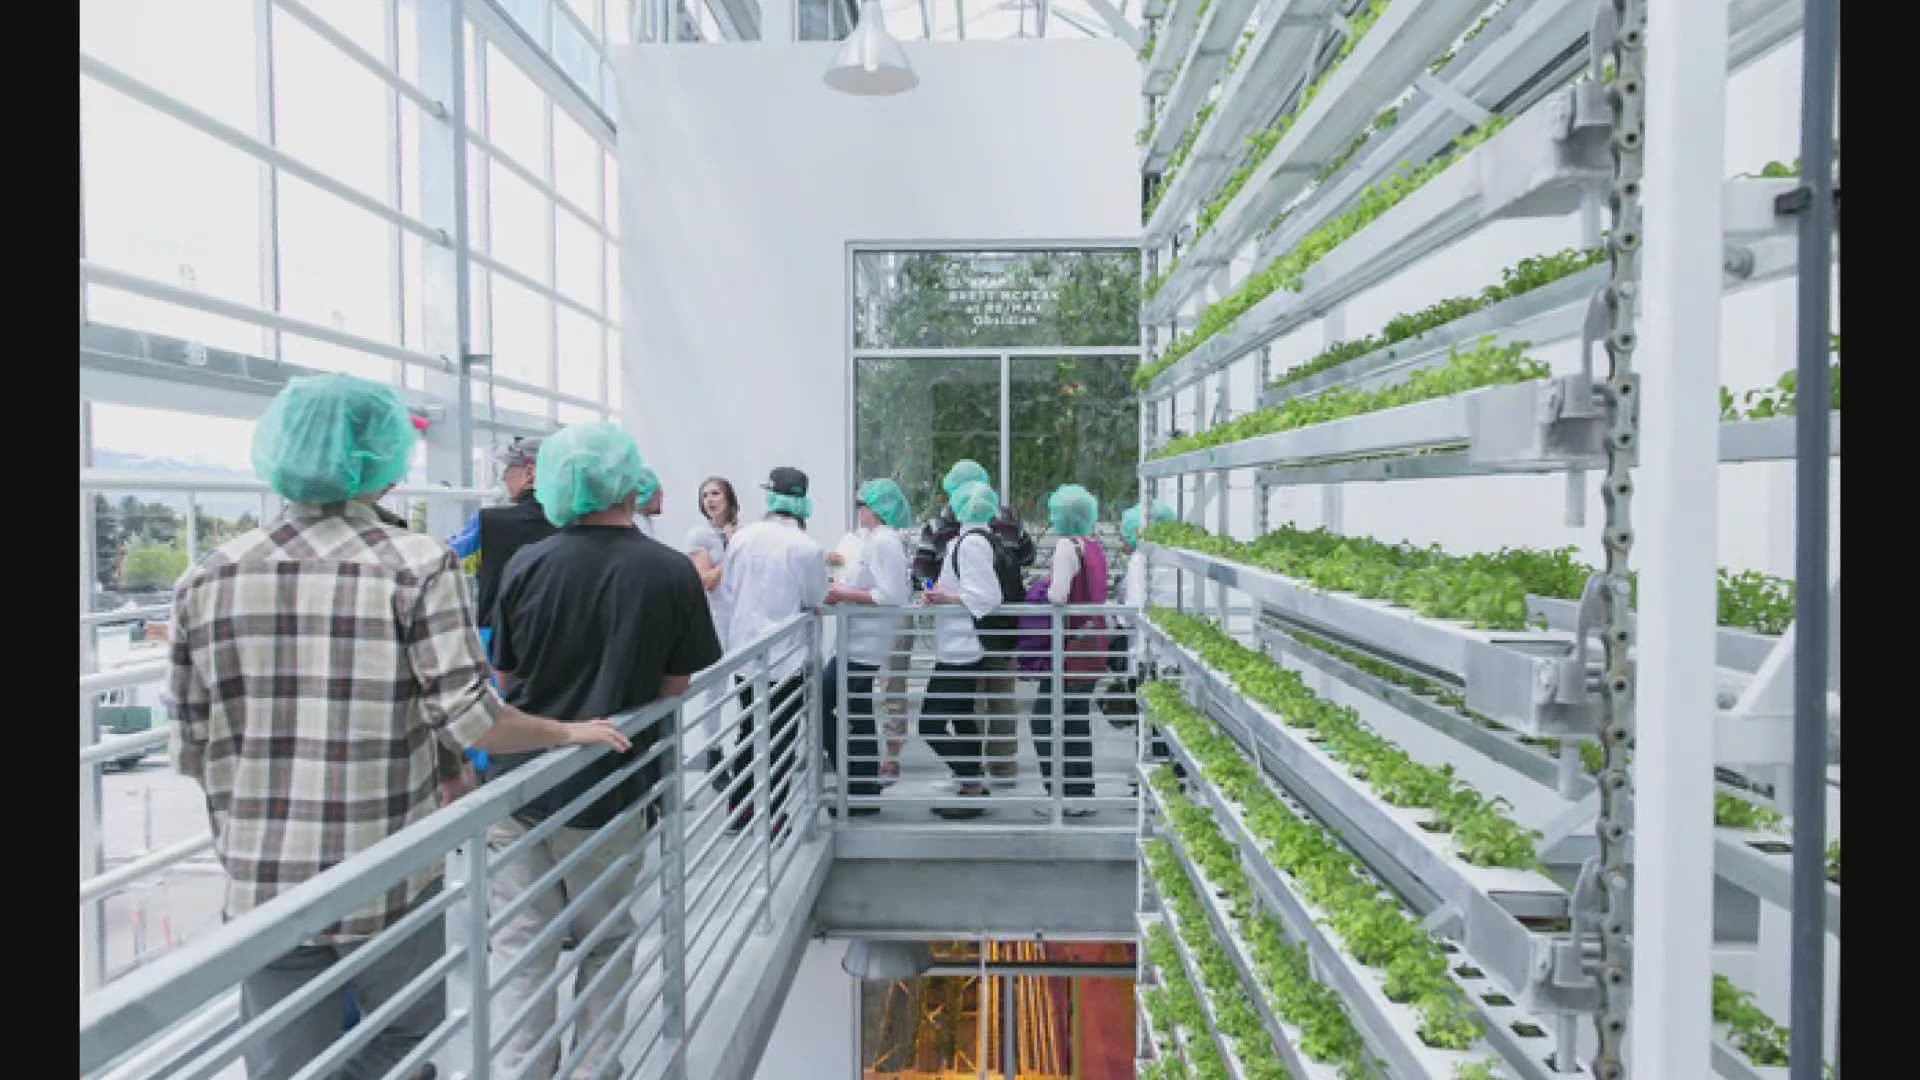 Vertical Harvest is coming to Maine with the fastest growing technology in the agriculture business.